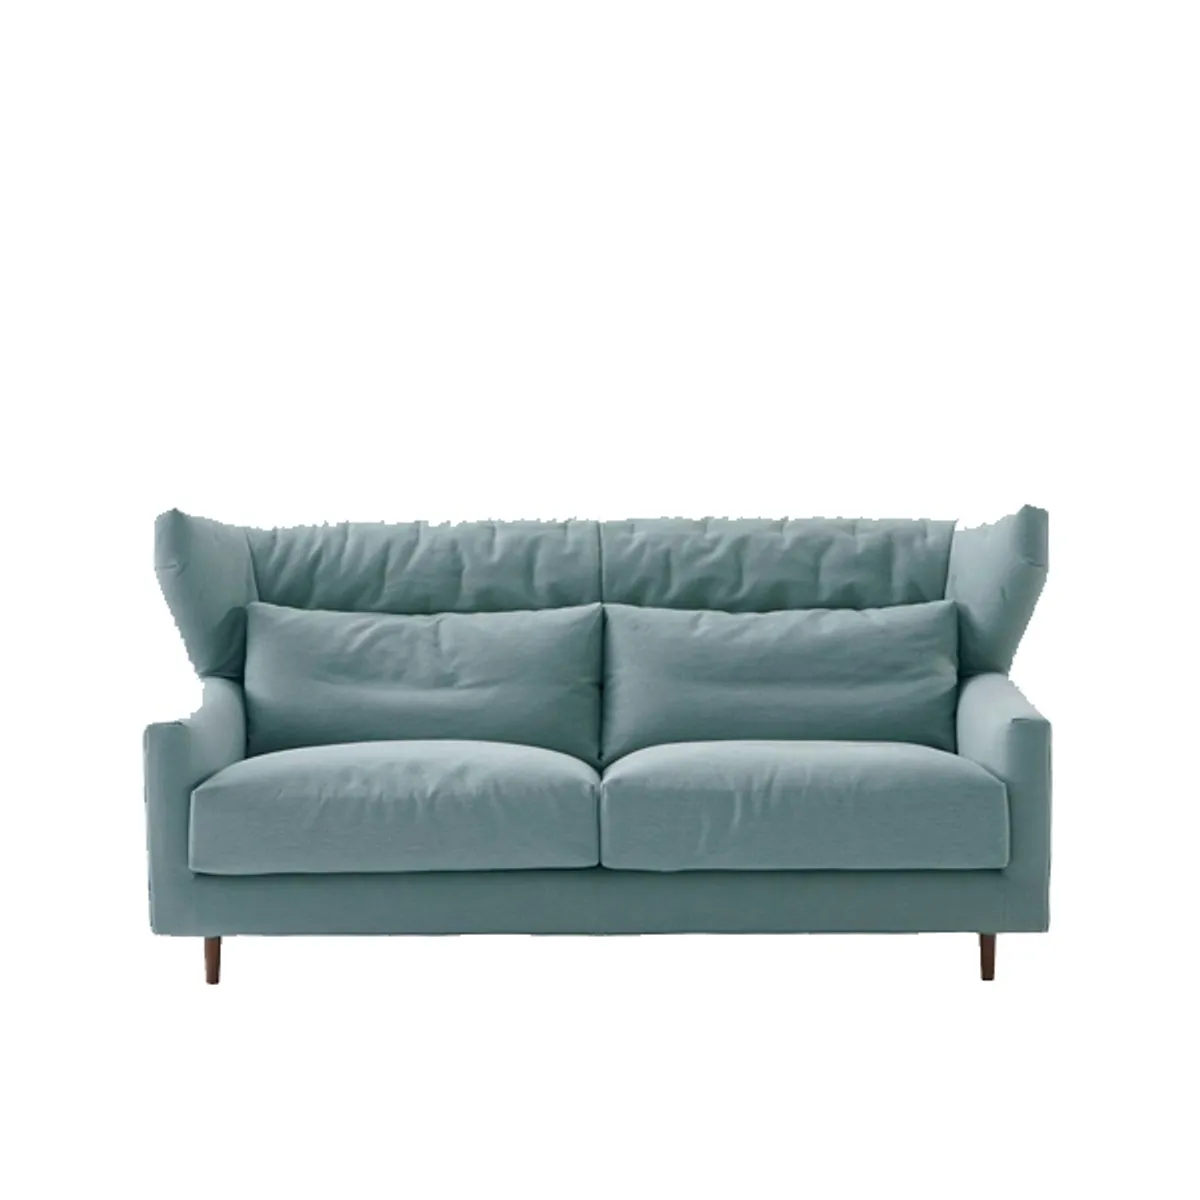 Folk sofa Inside Out Contracts